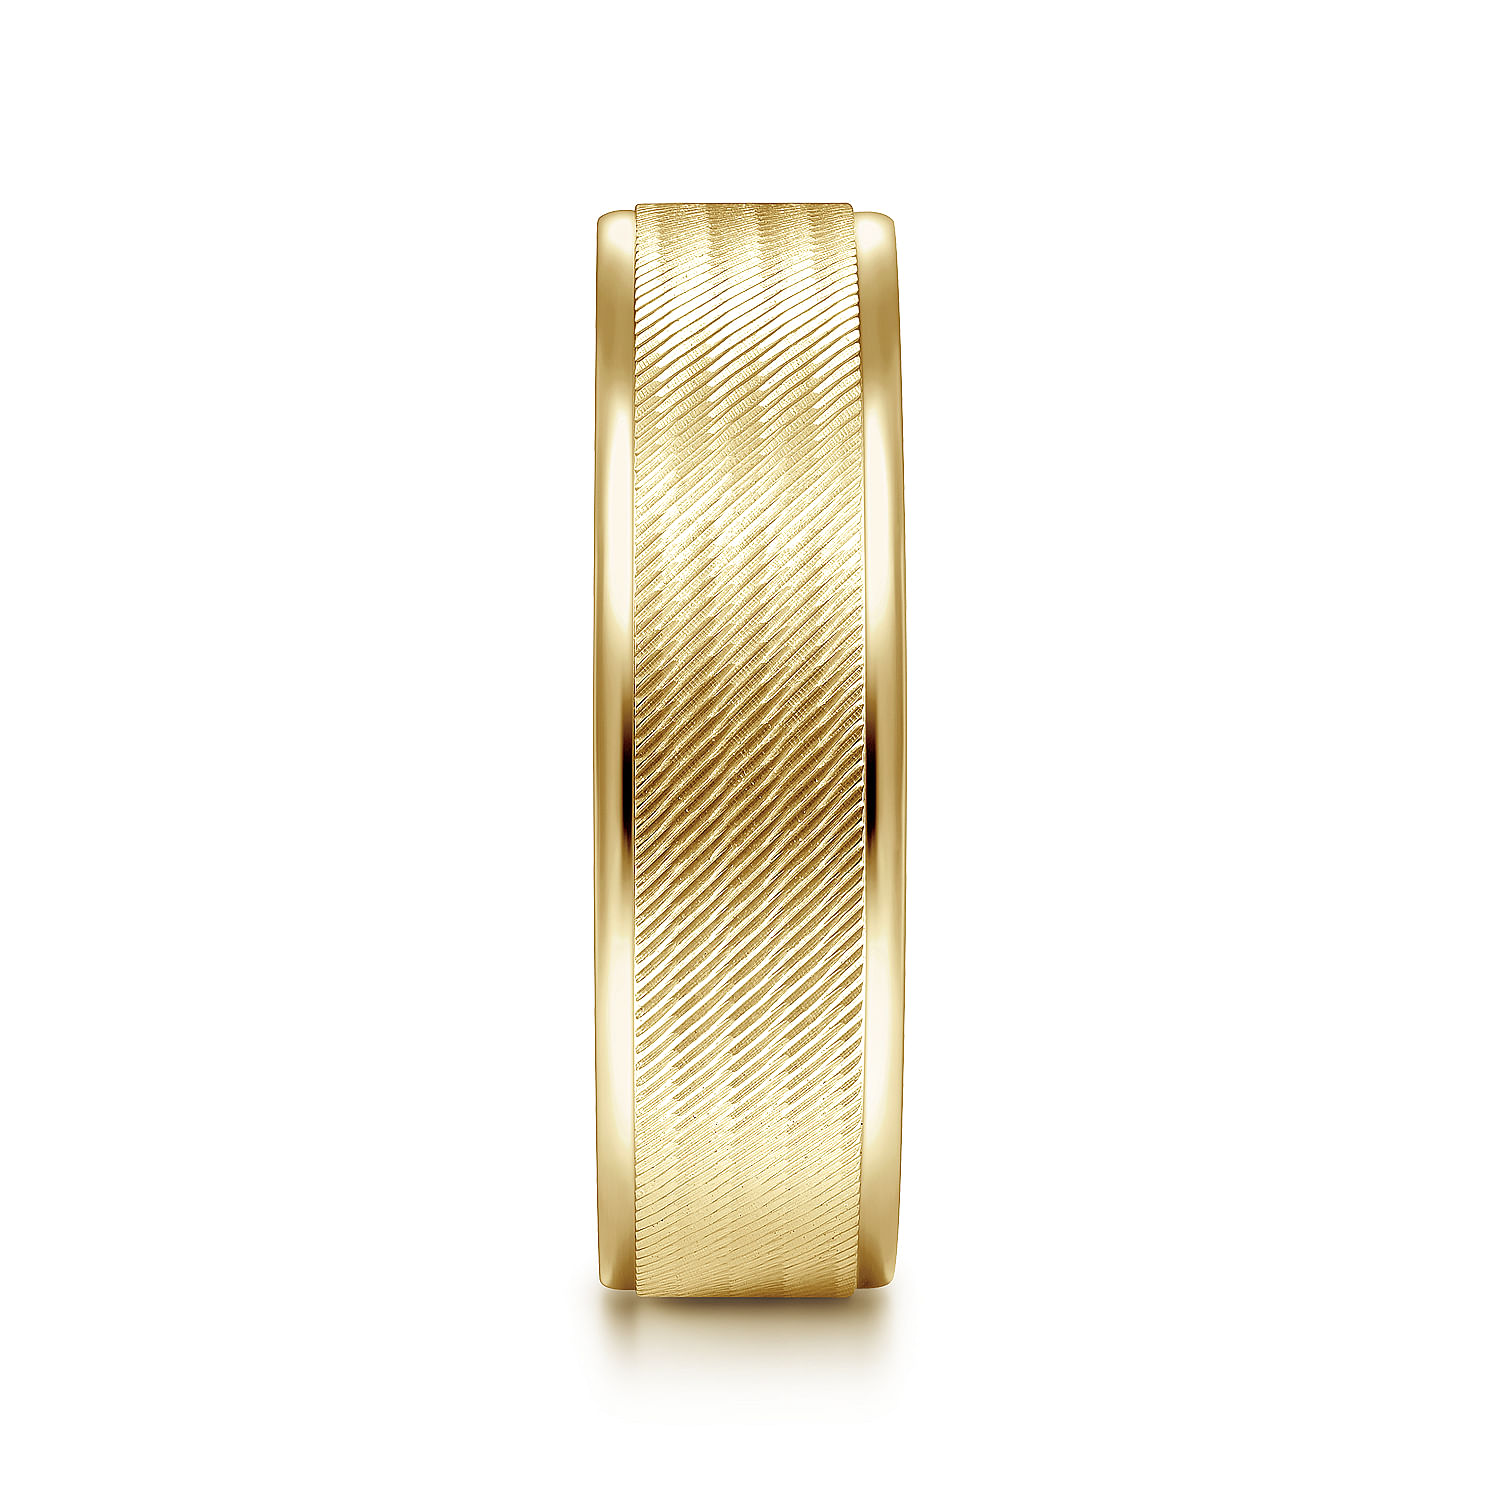 14K Yellow Gold 6mm - Men's Wedding Band in Brushed Finish